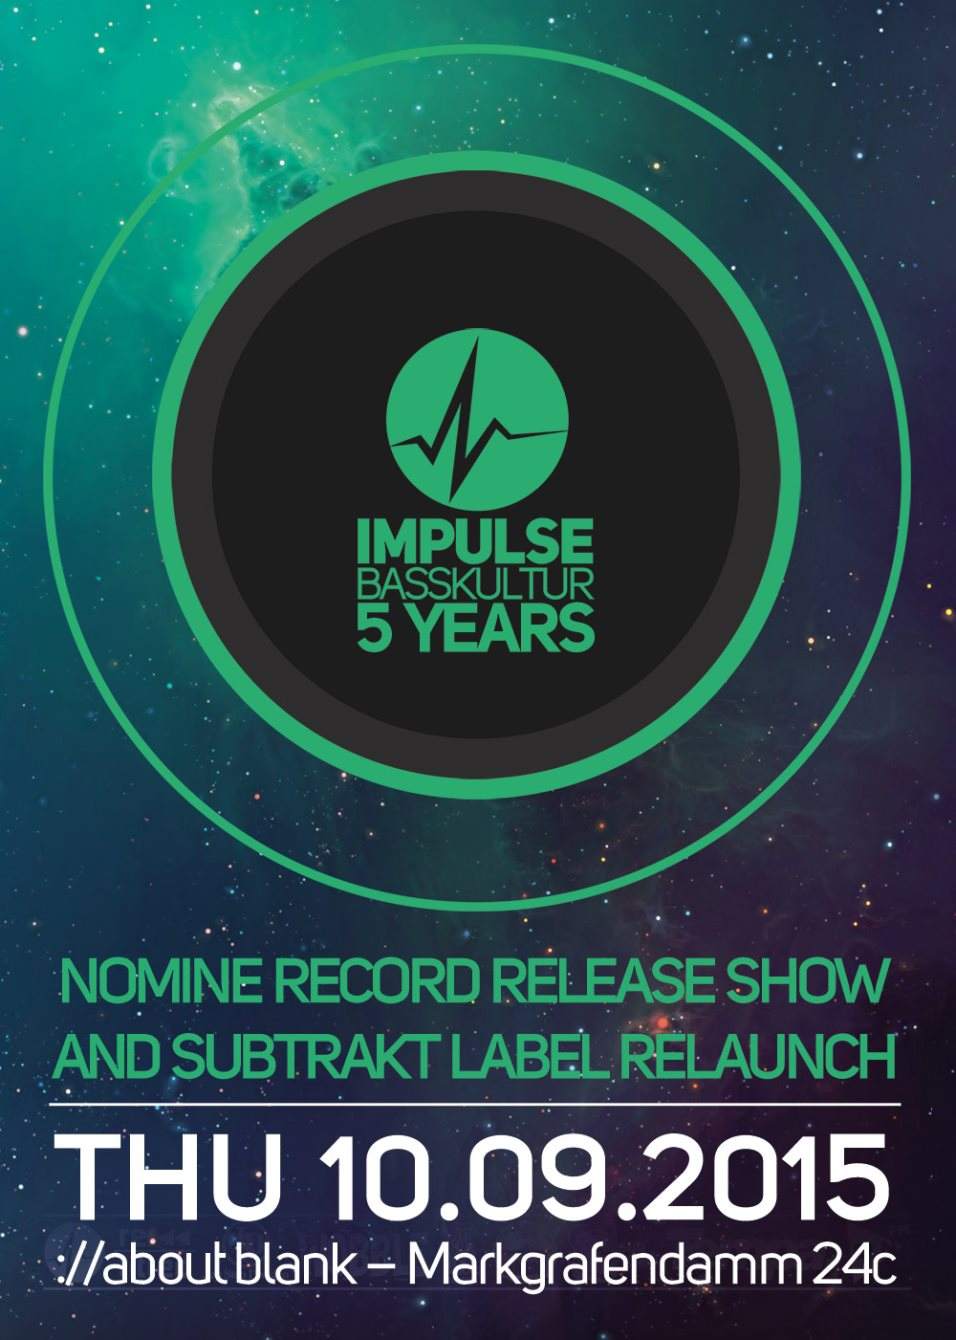 5 Years Impulse Basskultur with Nomine Record Release and Subtrakt Relaunch - フライヤー表